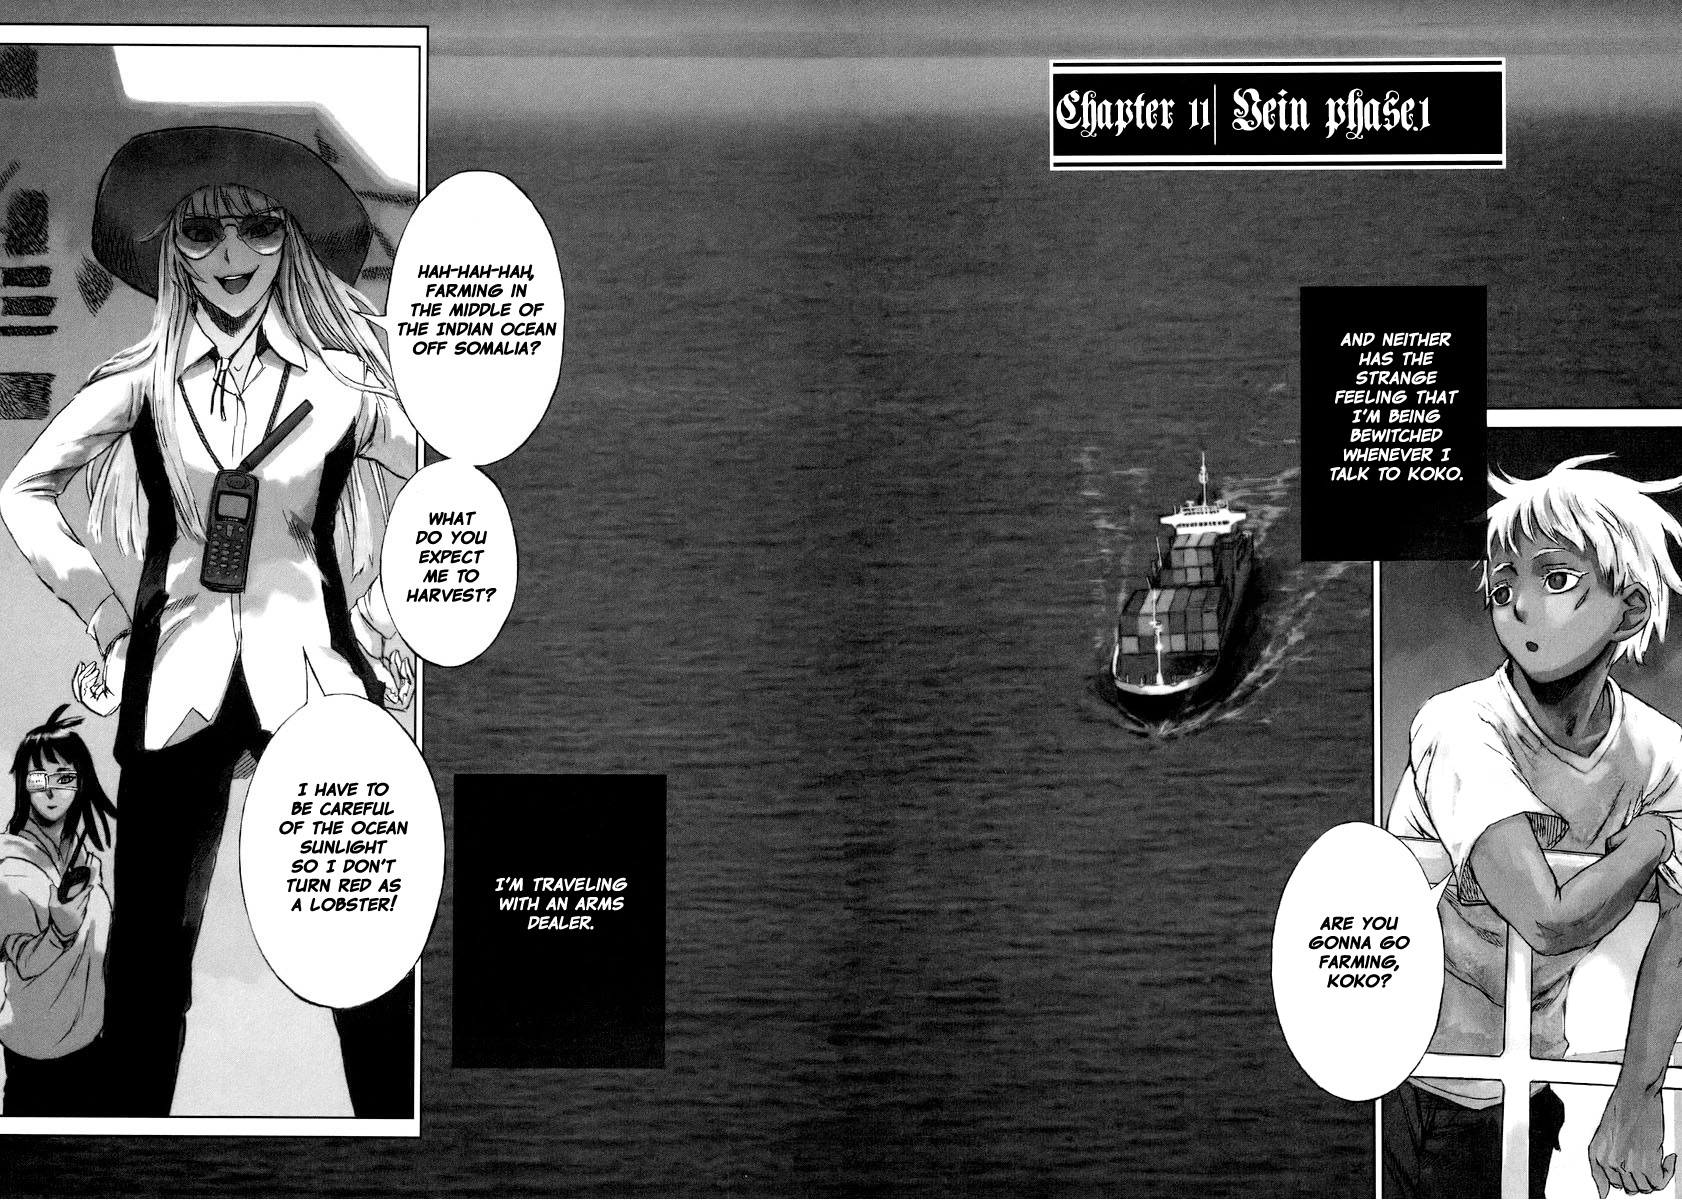 Jormungand Vol.2 Chapter 11: Bein Phase.1 - Picture 2